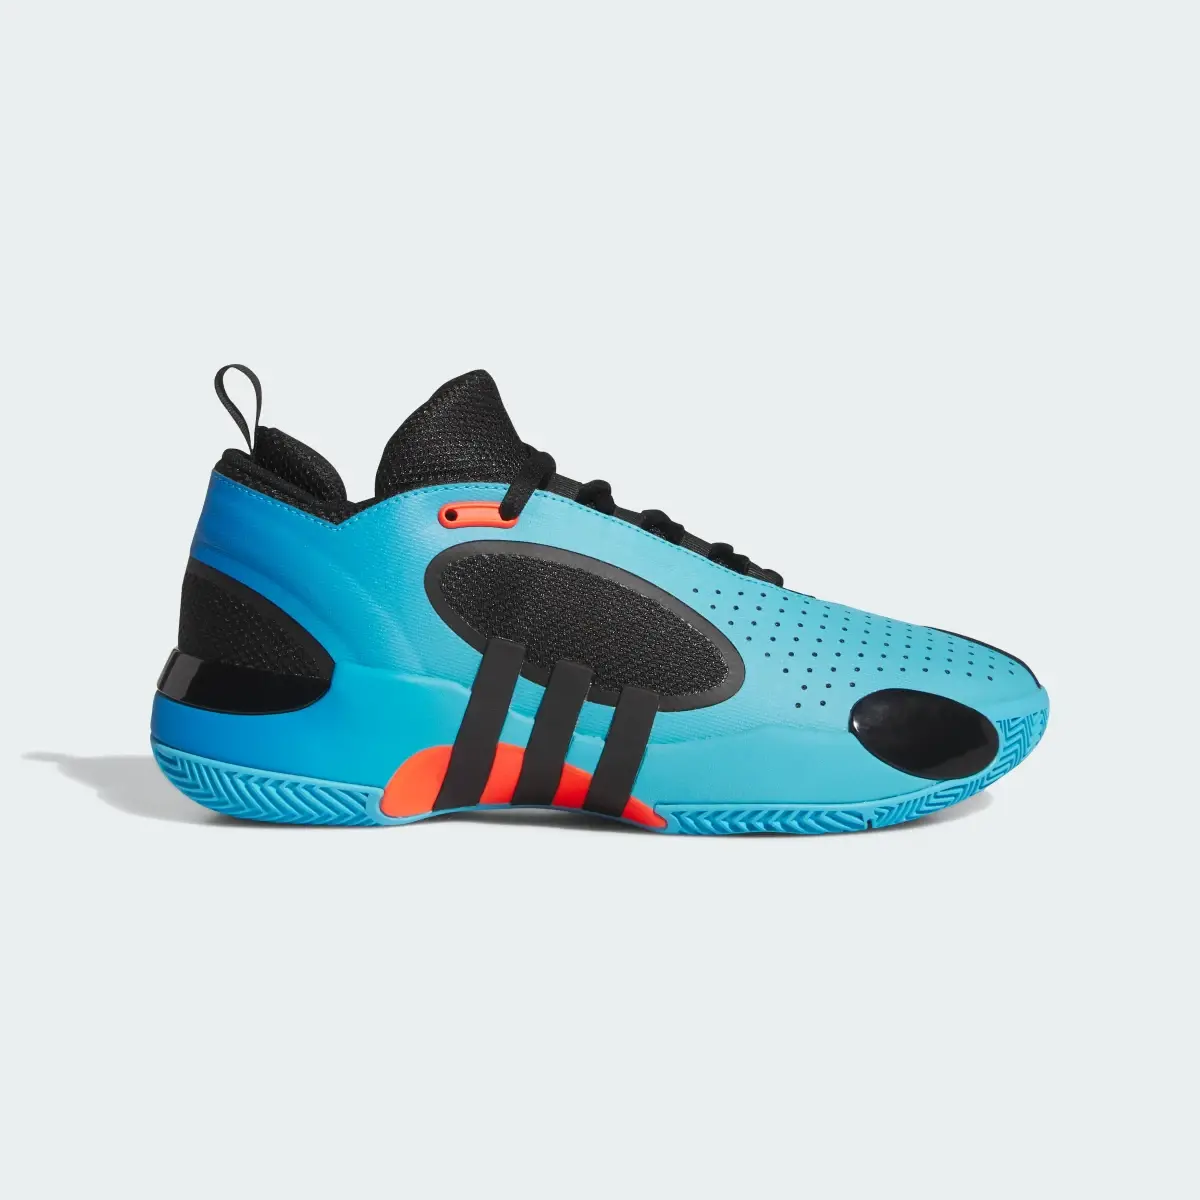 Adidas D.O.N. Issue 5 Basketball Shoes. 2